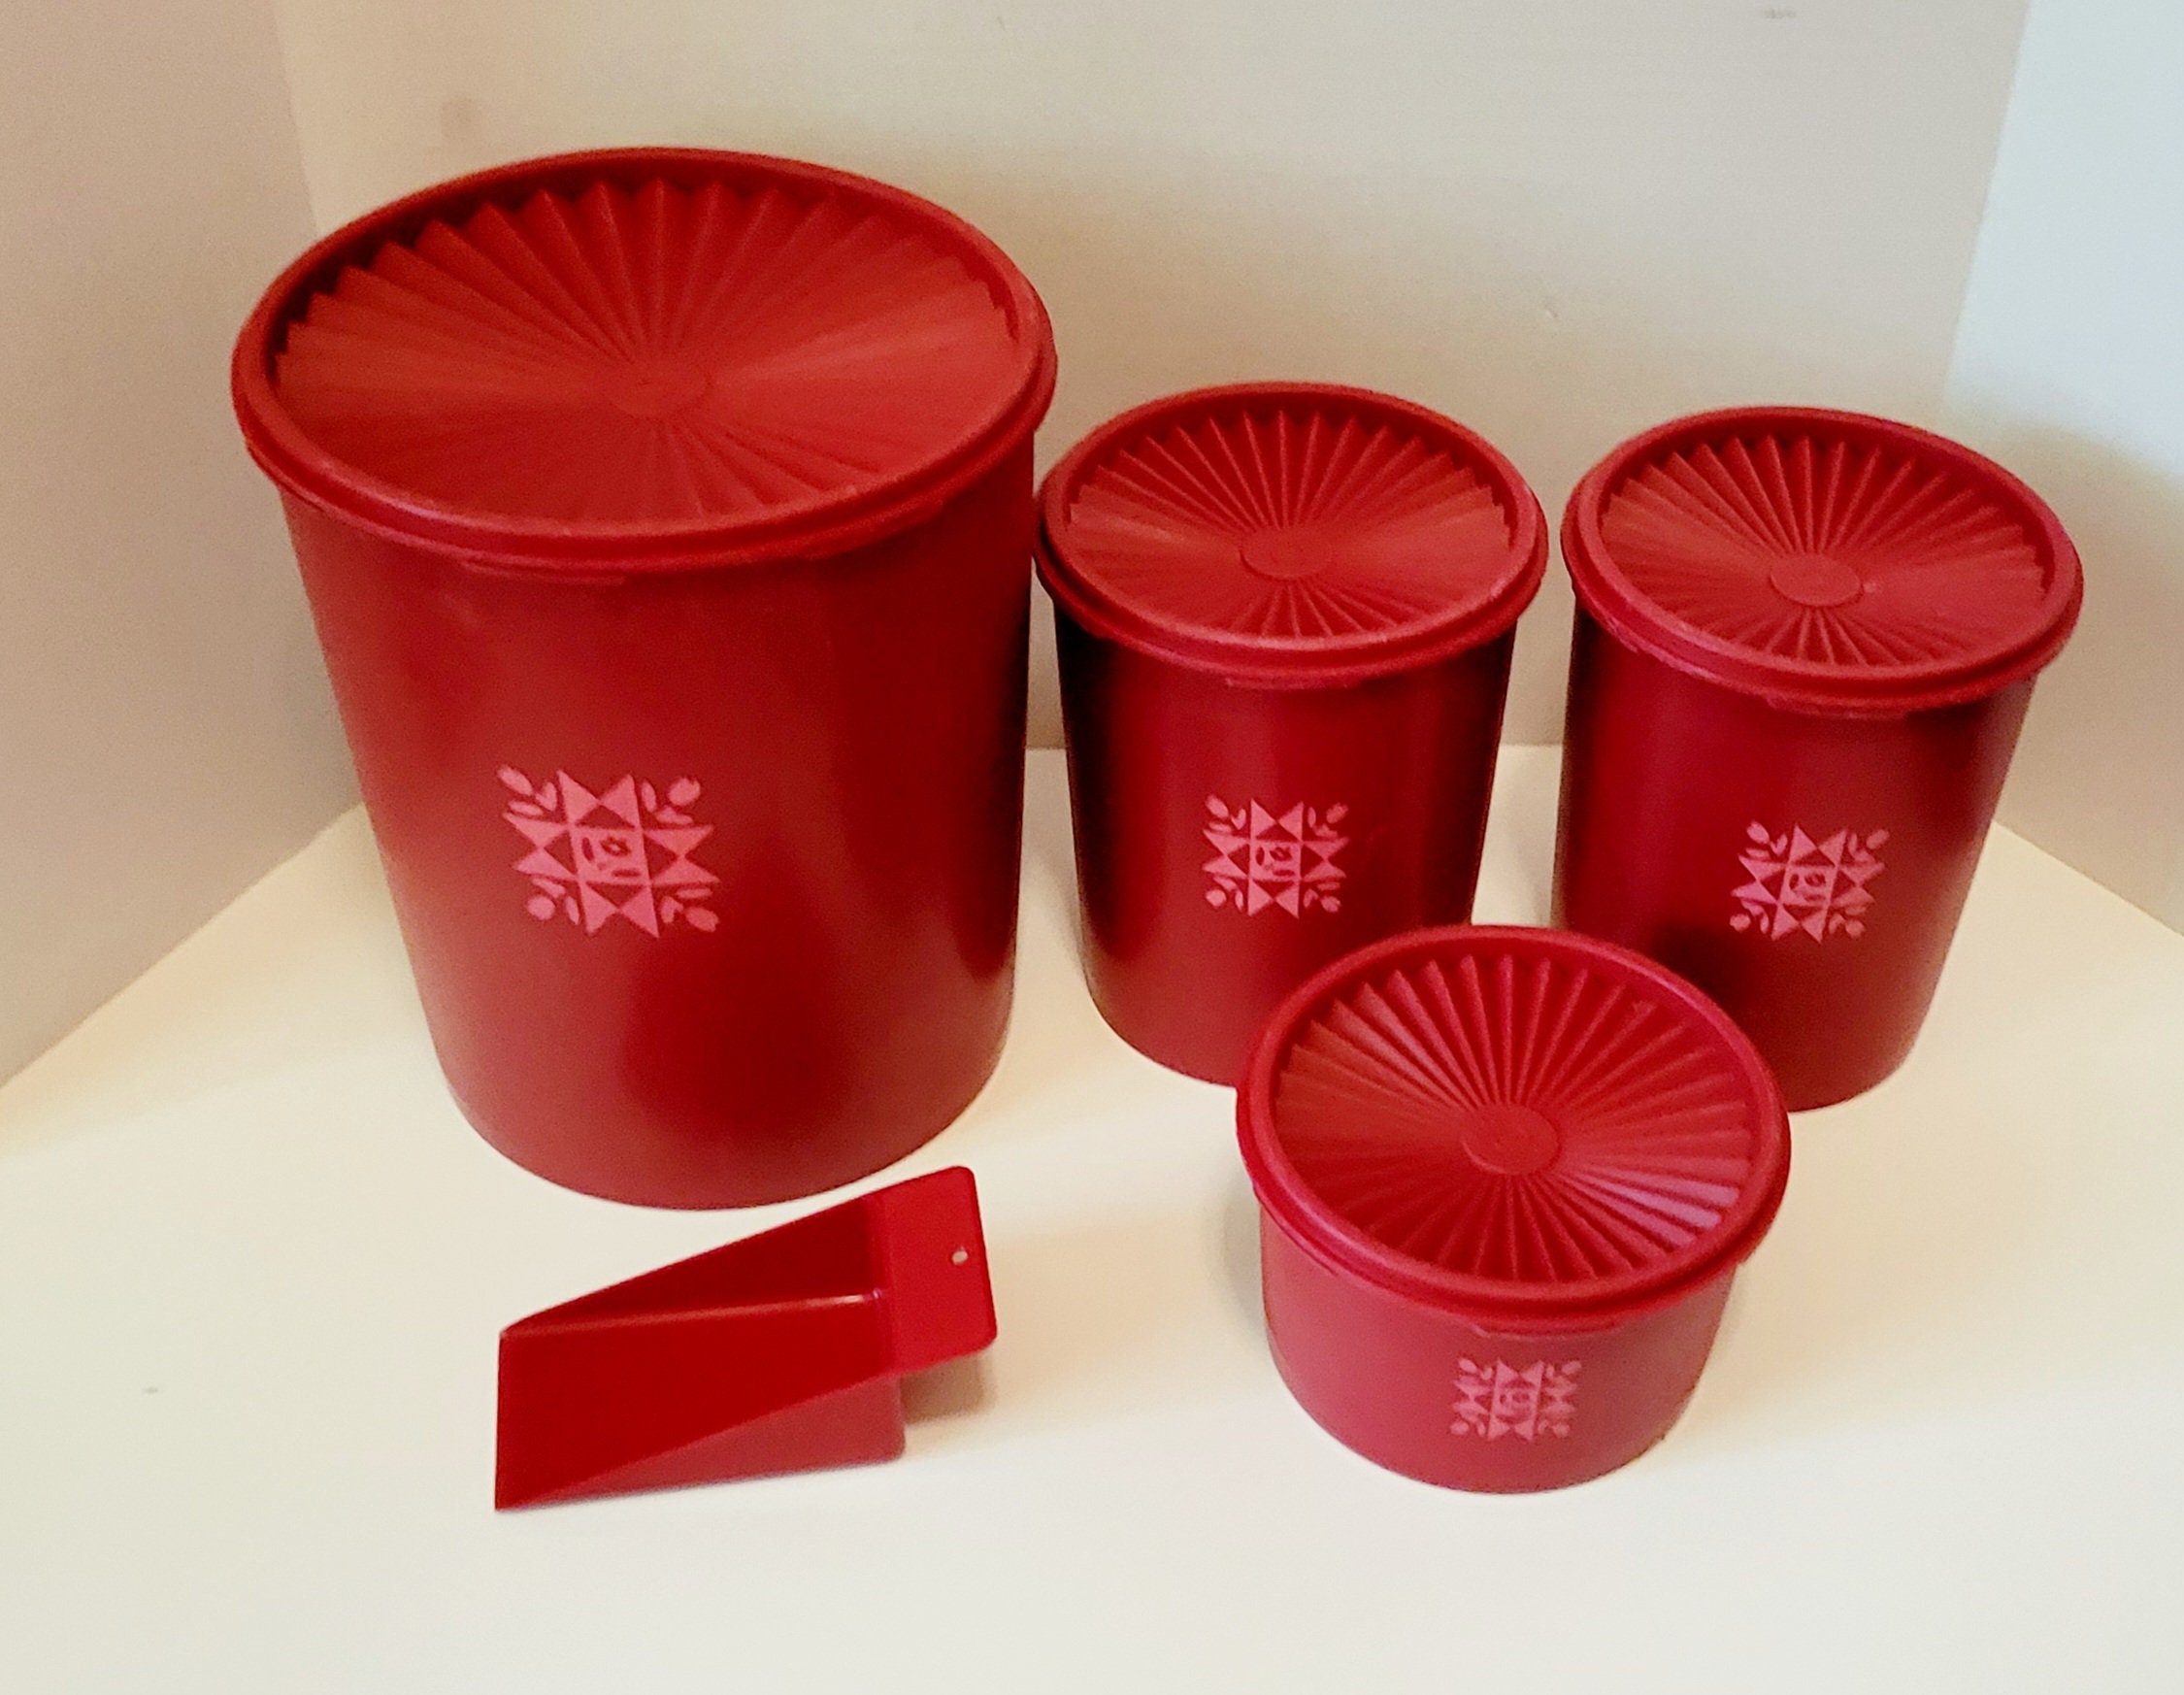 Vintage Tupperware Canisters Tupperware Canisters Vintage -